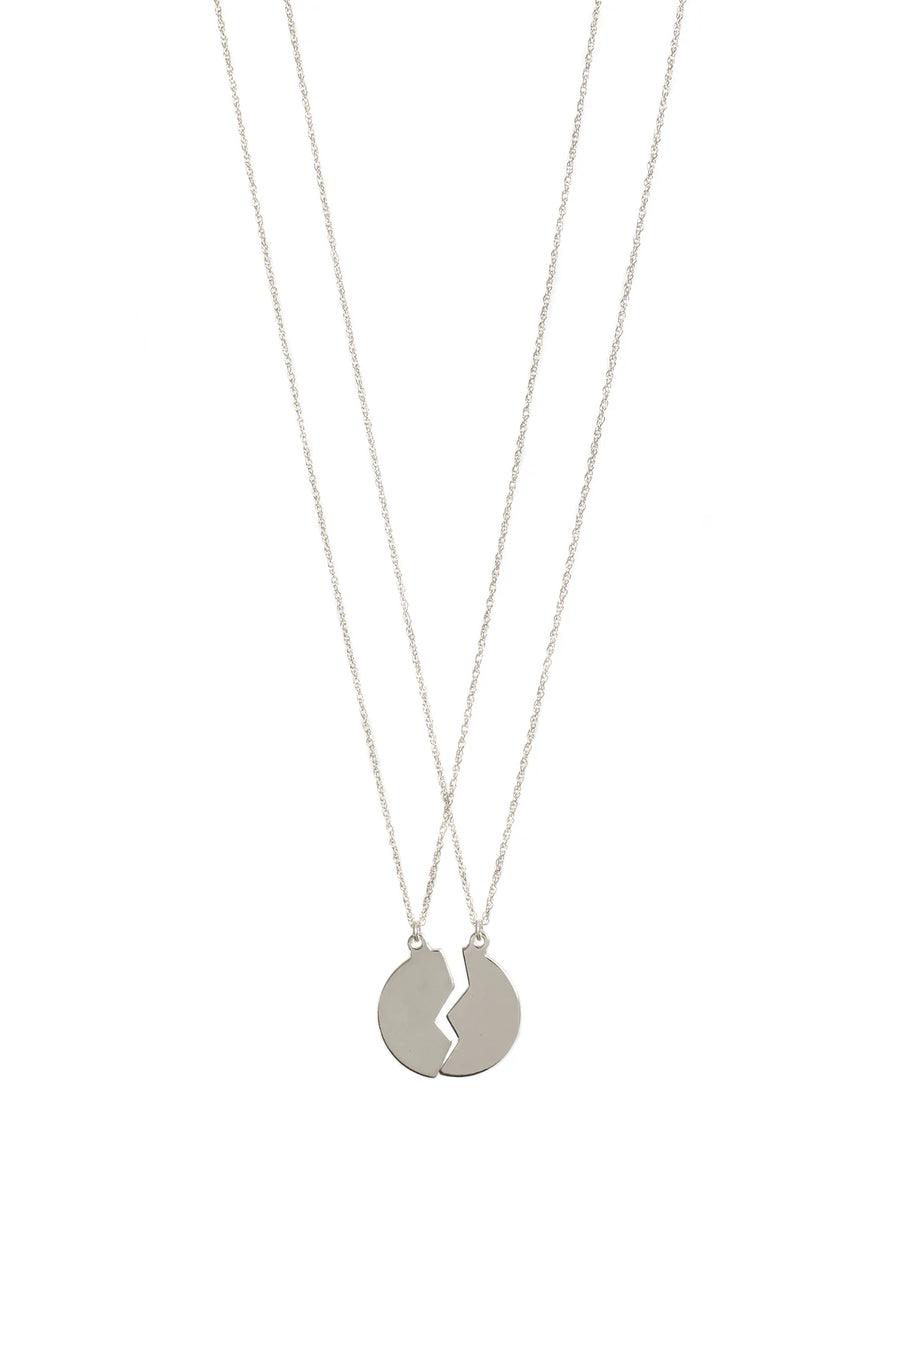 LISBETH JEWELRY - COLLIER DUO BFF - ARGENT